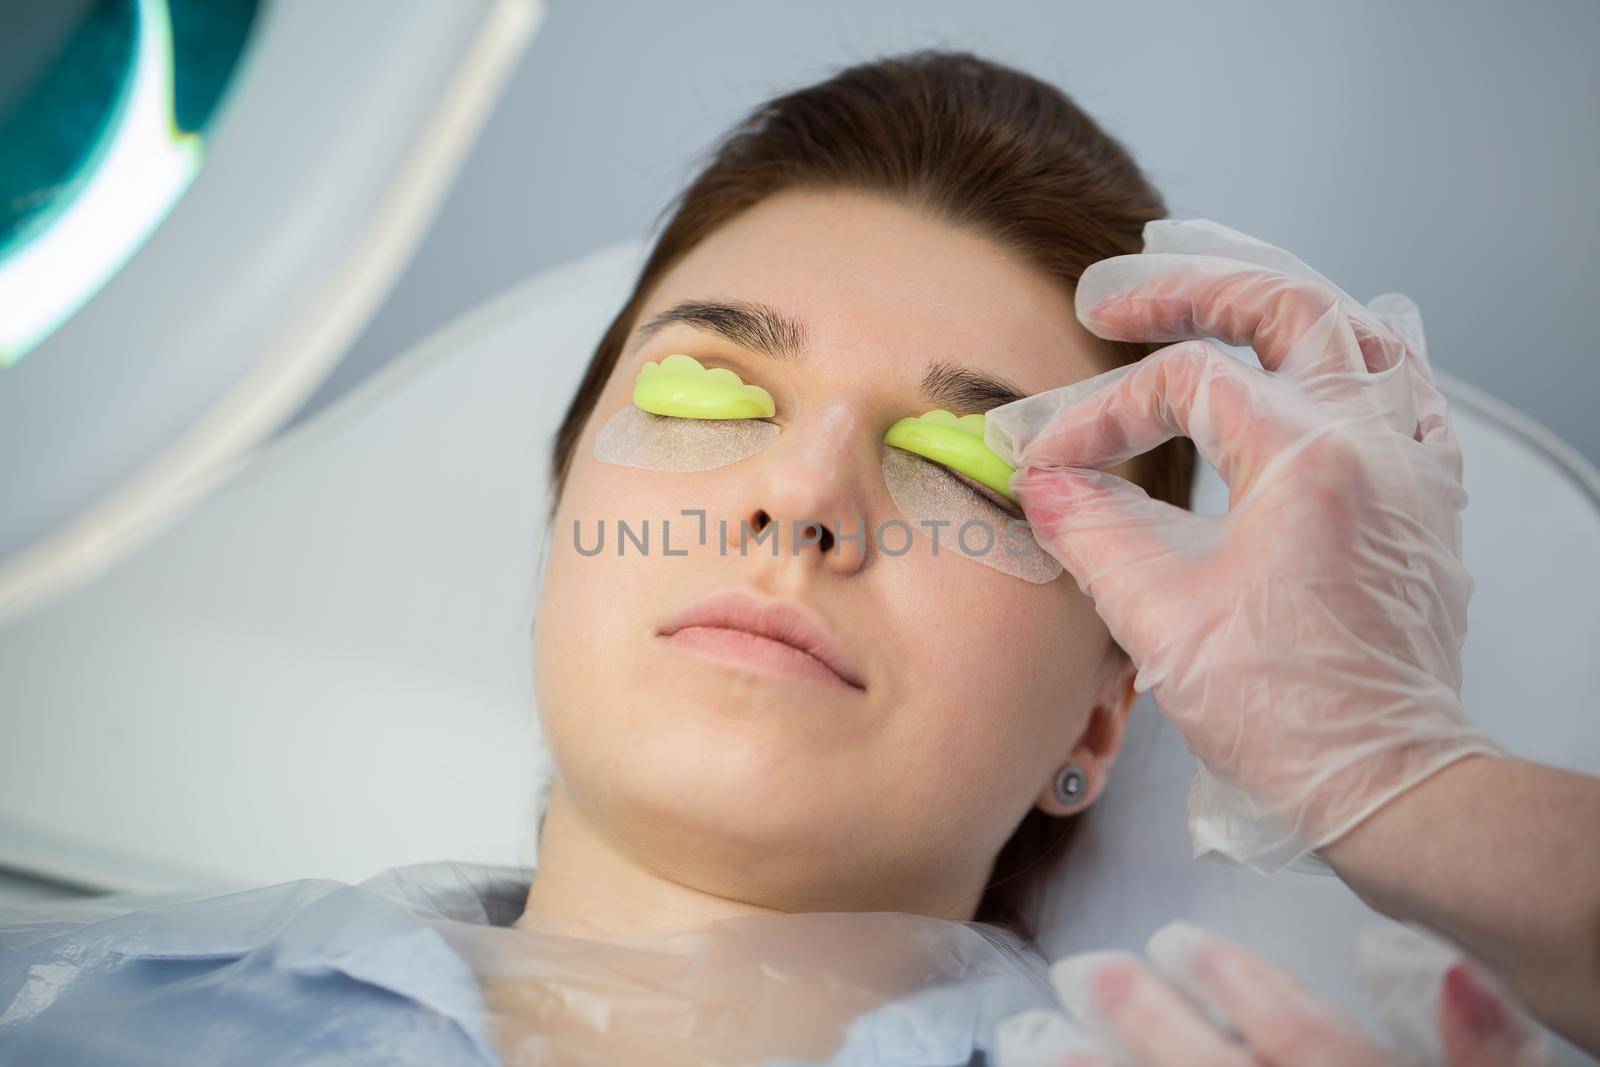 Eyelash Extension Procedure. Woman Eye with Long Eyelashes. Lashes, close up, selected focus. by StudioPeace